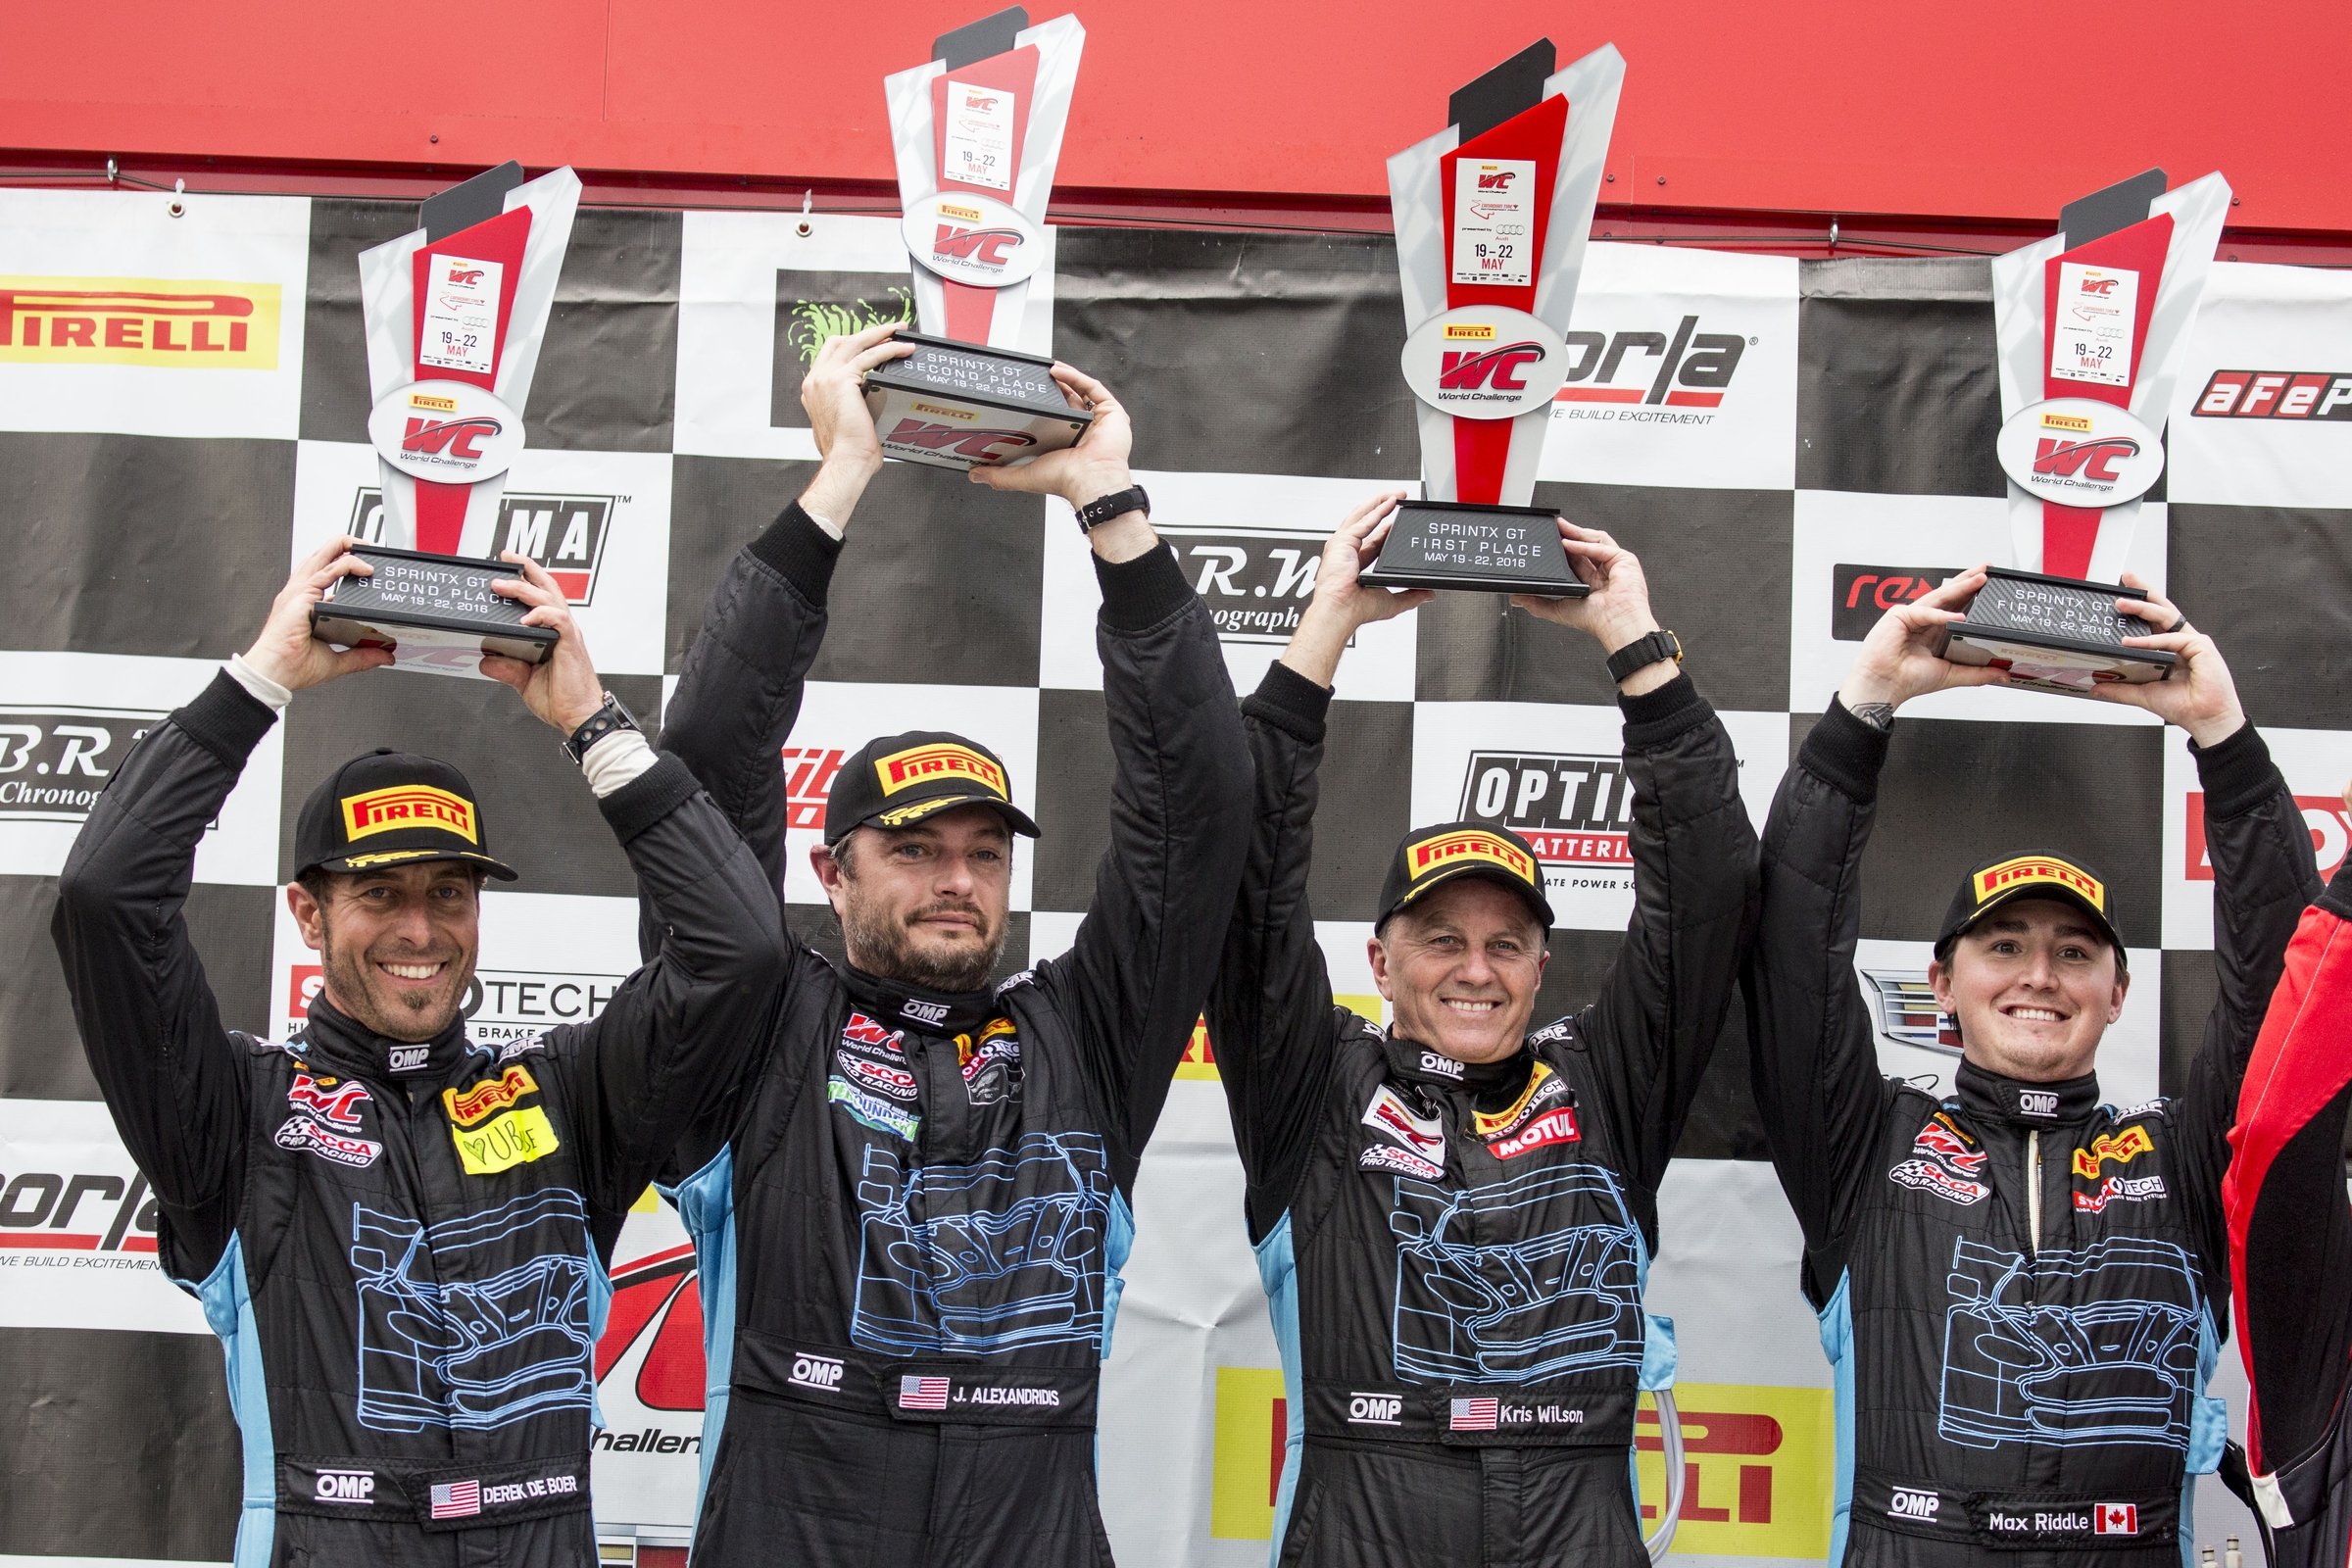 Victory in Canada: TRG-Aston Martin Racing Earns Three Wins, Six Podiums Over PWC Race Weekend